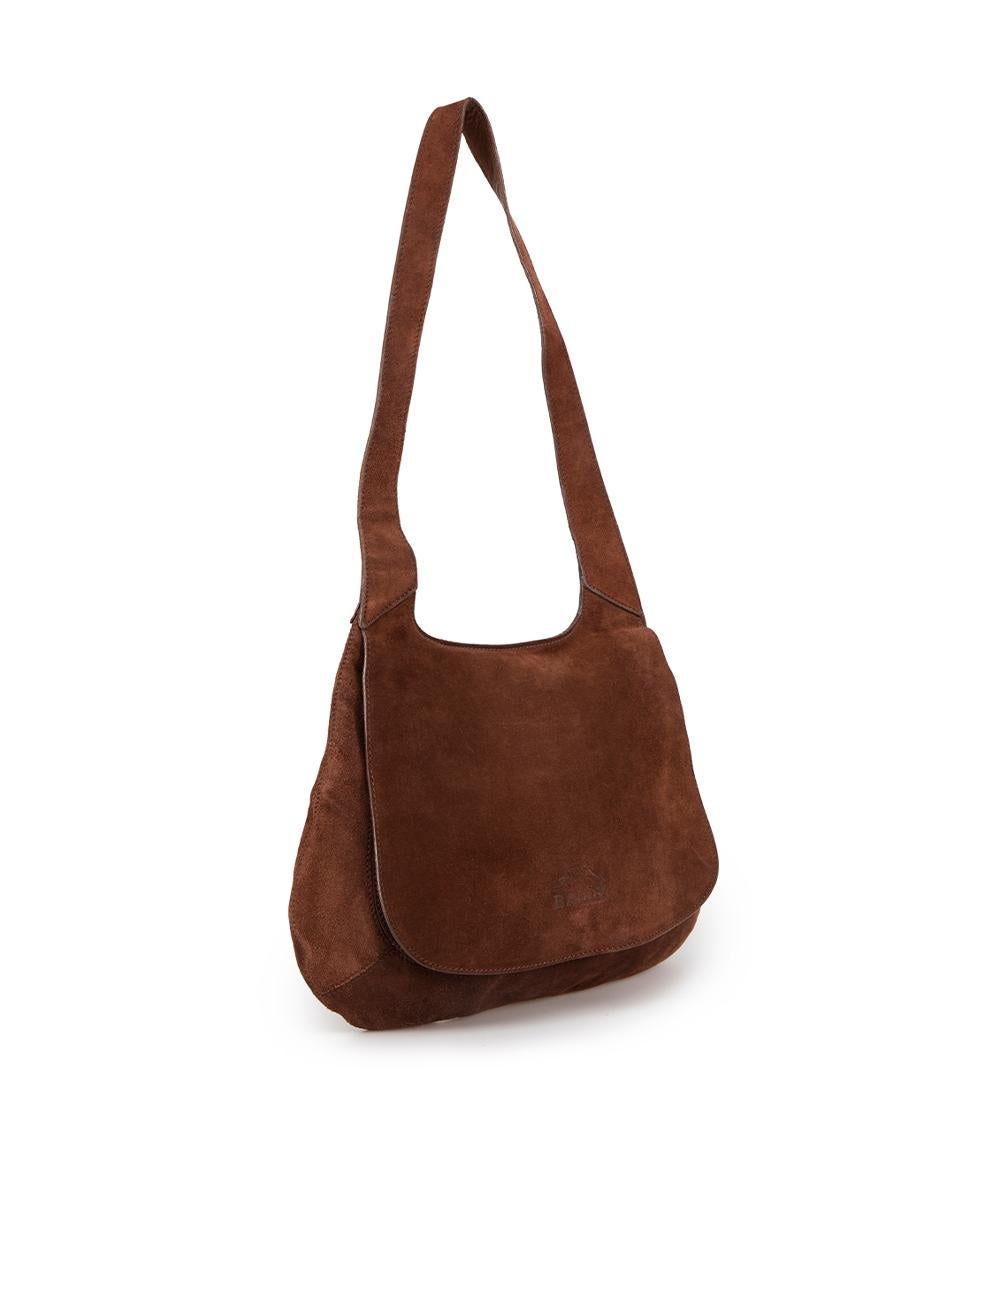 CONDITION is Very good. Minor scratching to suede is evident. Minimal wear on this used Bally designer resale item.



Details


Brown

Suede

Shoulder bag

Flap opening

Magnetic button fastening

1x Non adjustable strap

1x Main compartment with